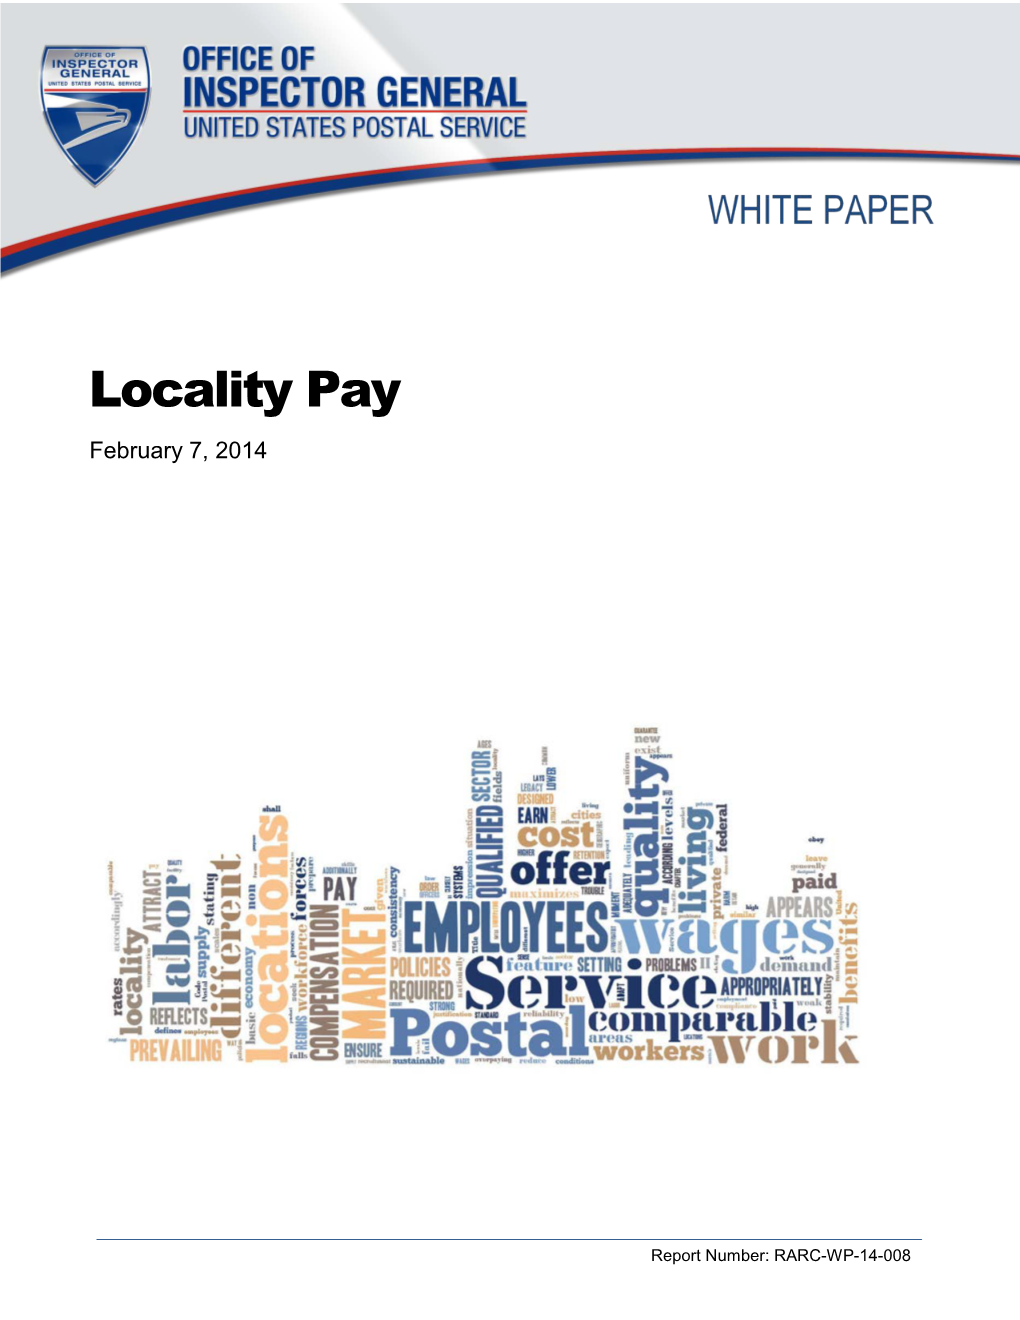 Locality Pay